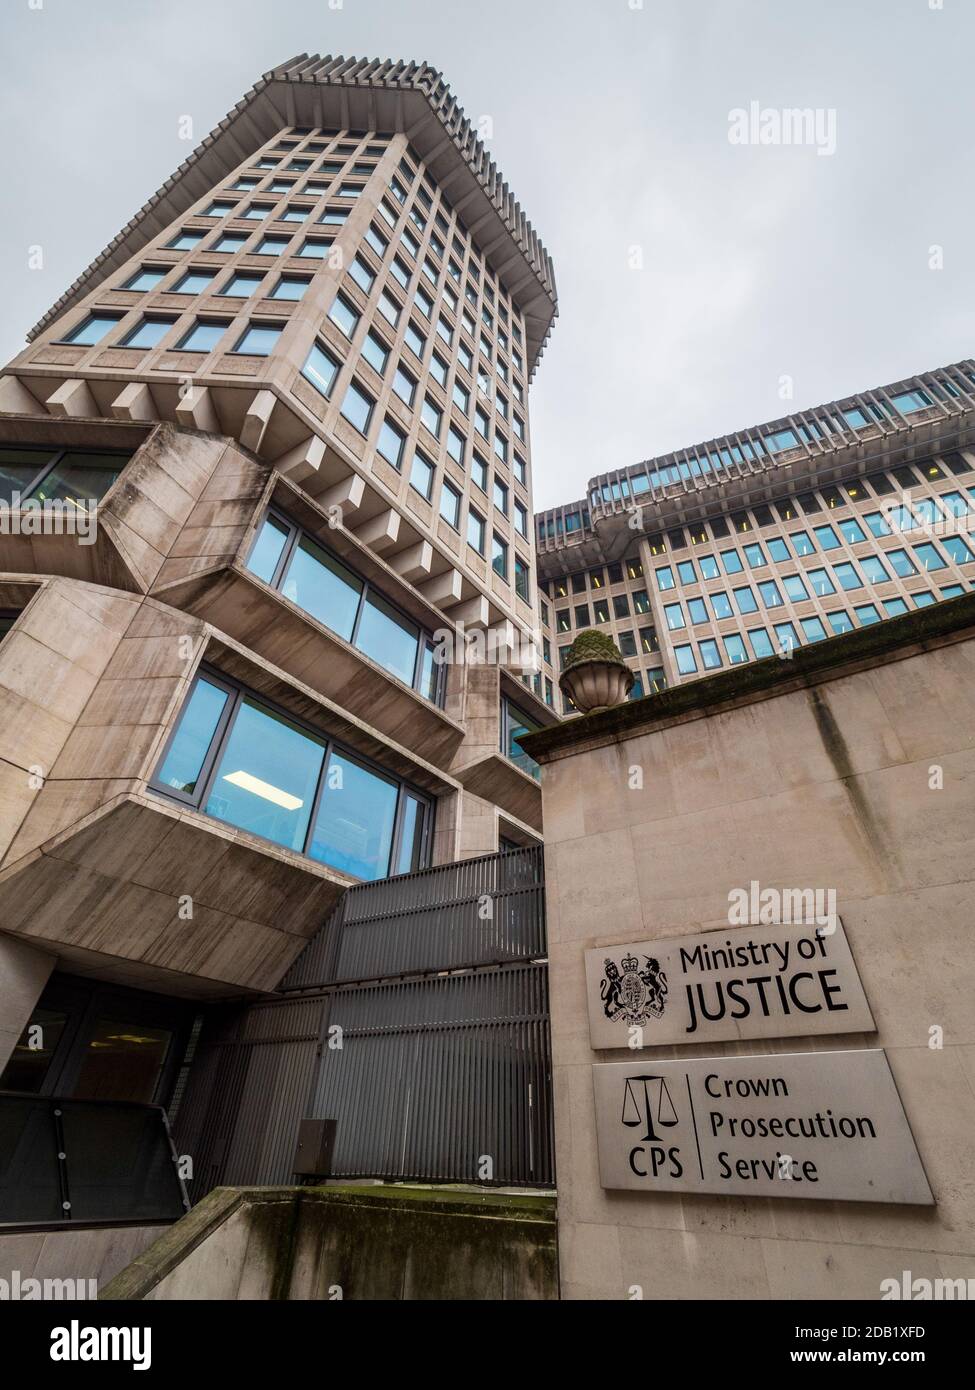 UK Ministry of Justice & Crown Prosecution Service - Offices of the Ministry of Justice & Crown Prosecution Service Offices, Petty France, London Stock Photo